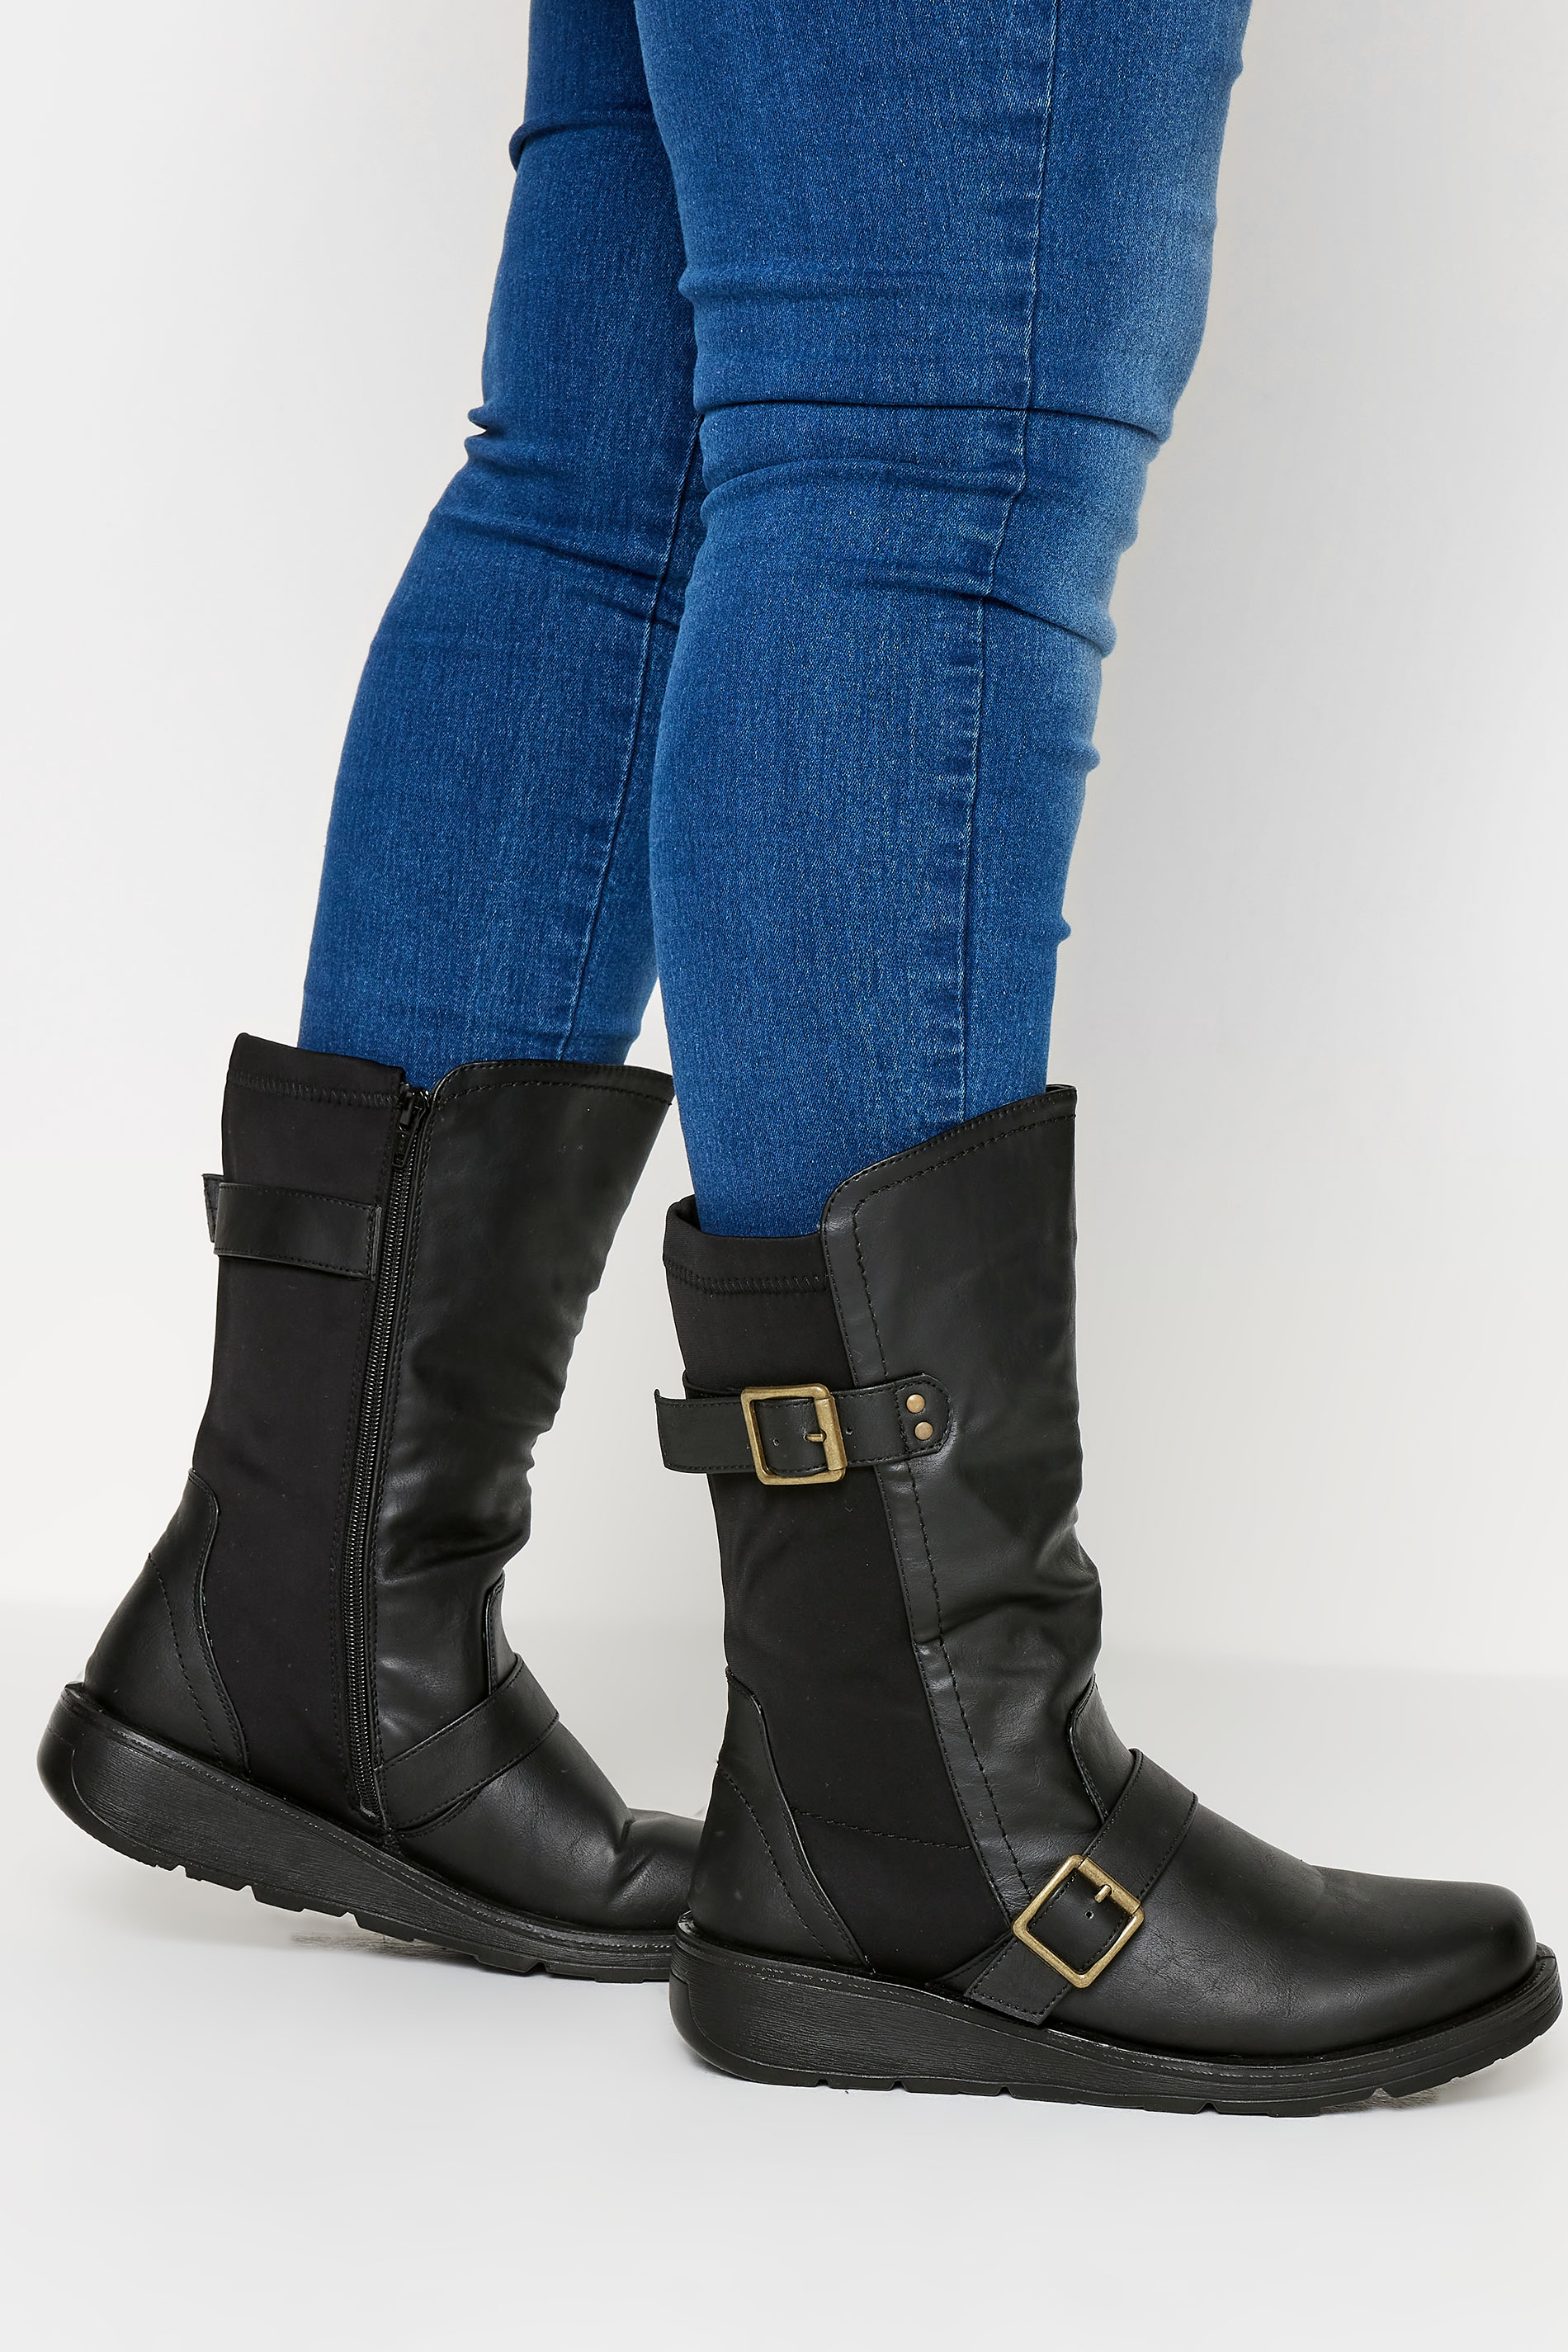 Black Faux Leather Wedge Buckle Boots In Extra Wide EEE Fit | Yours Clothing 1